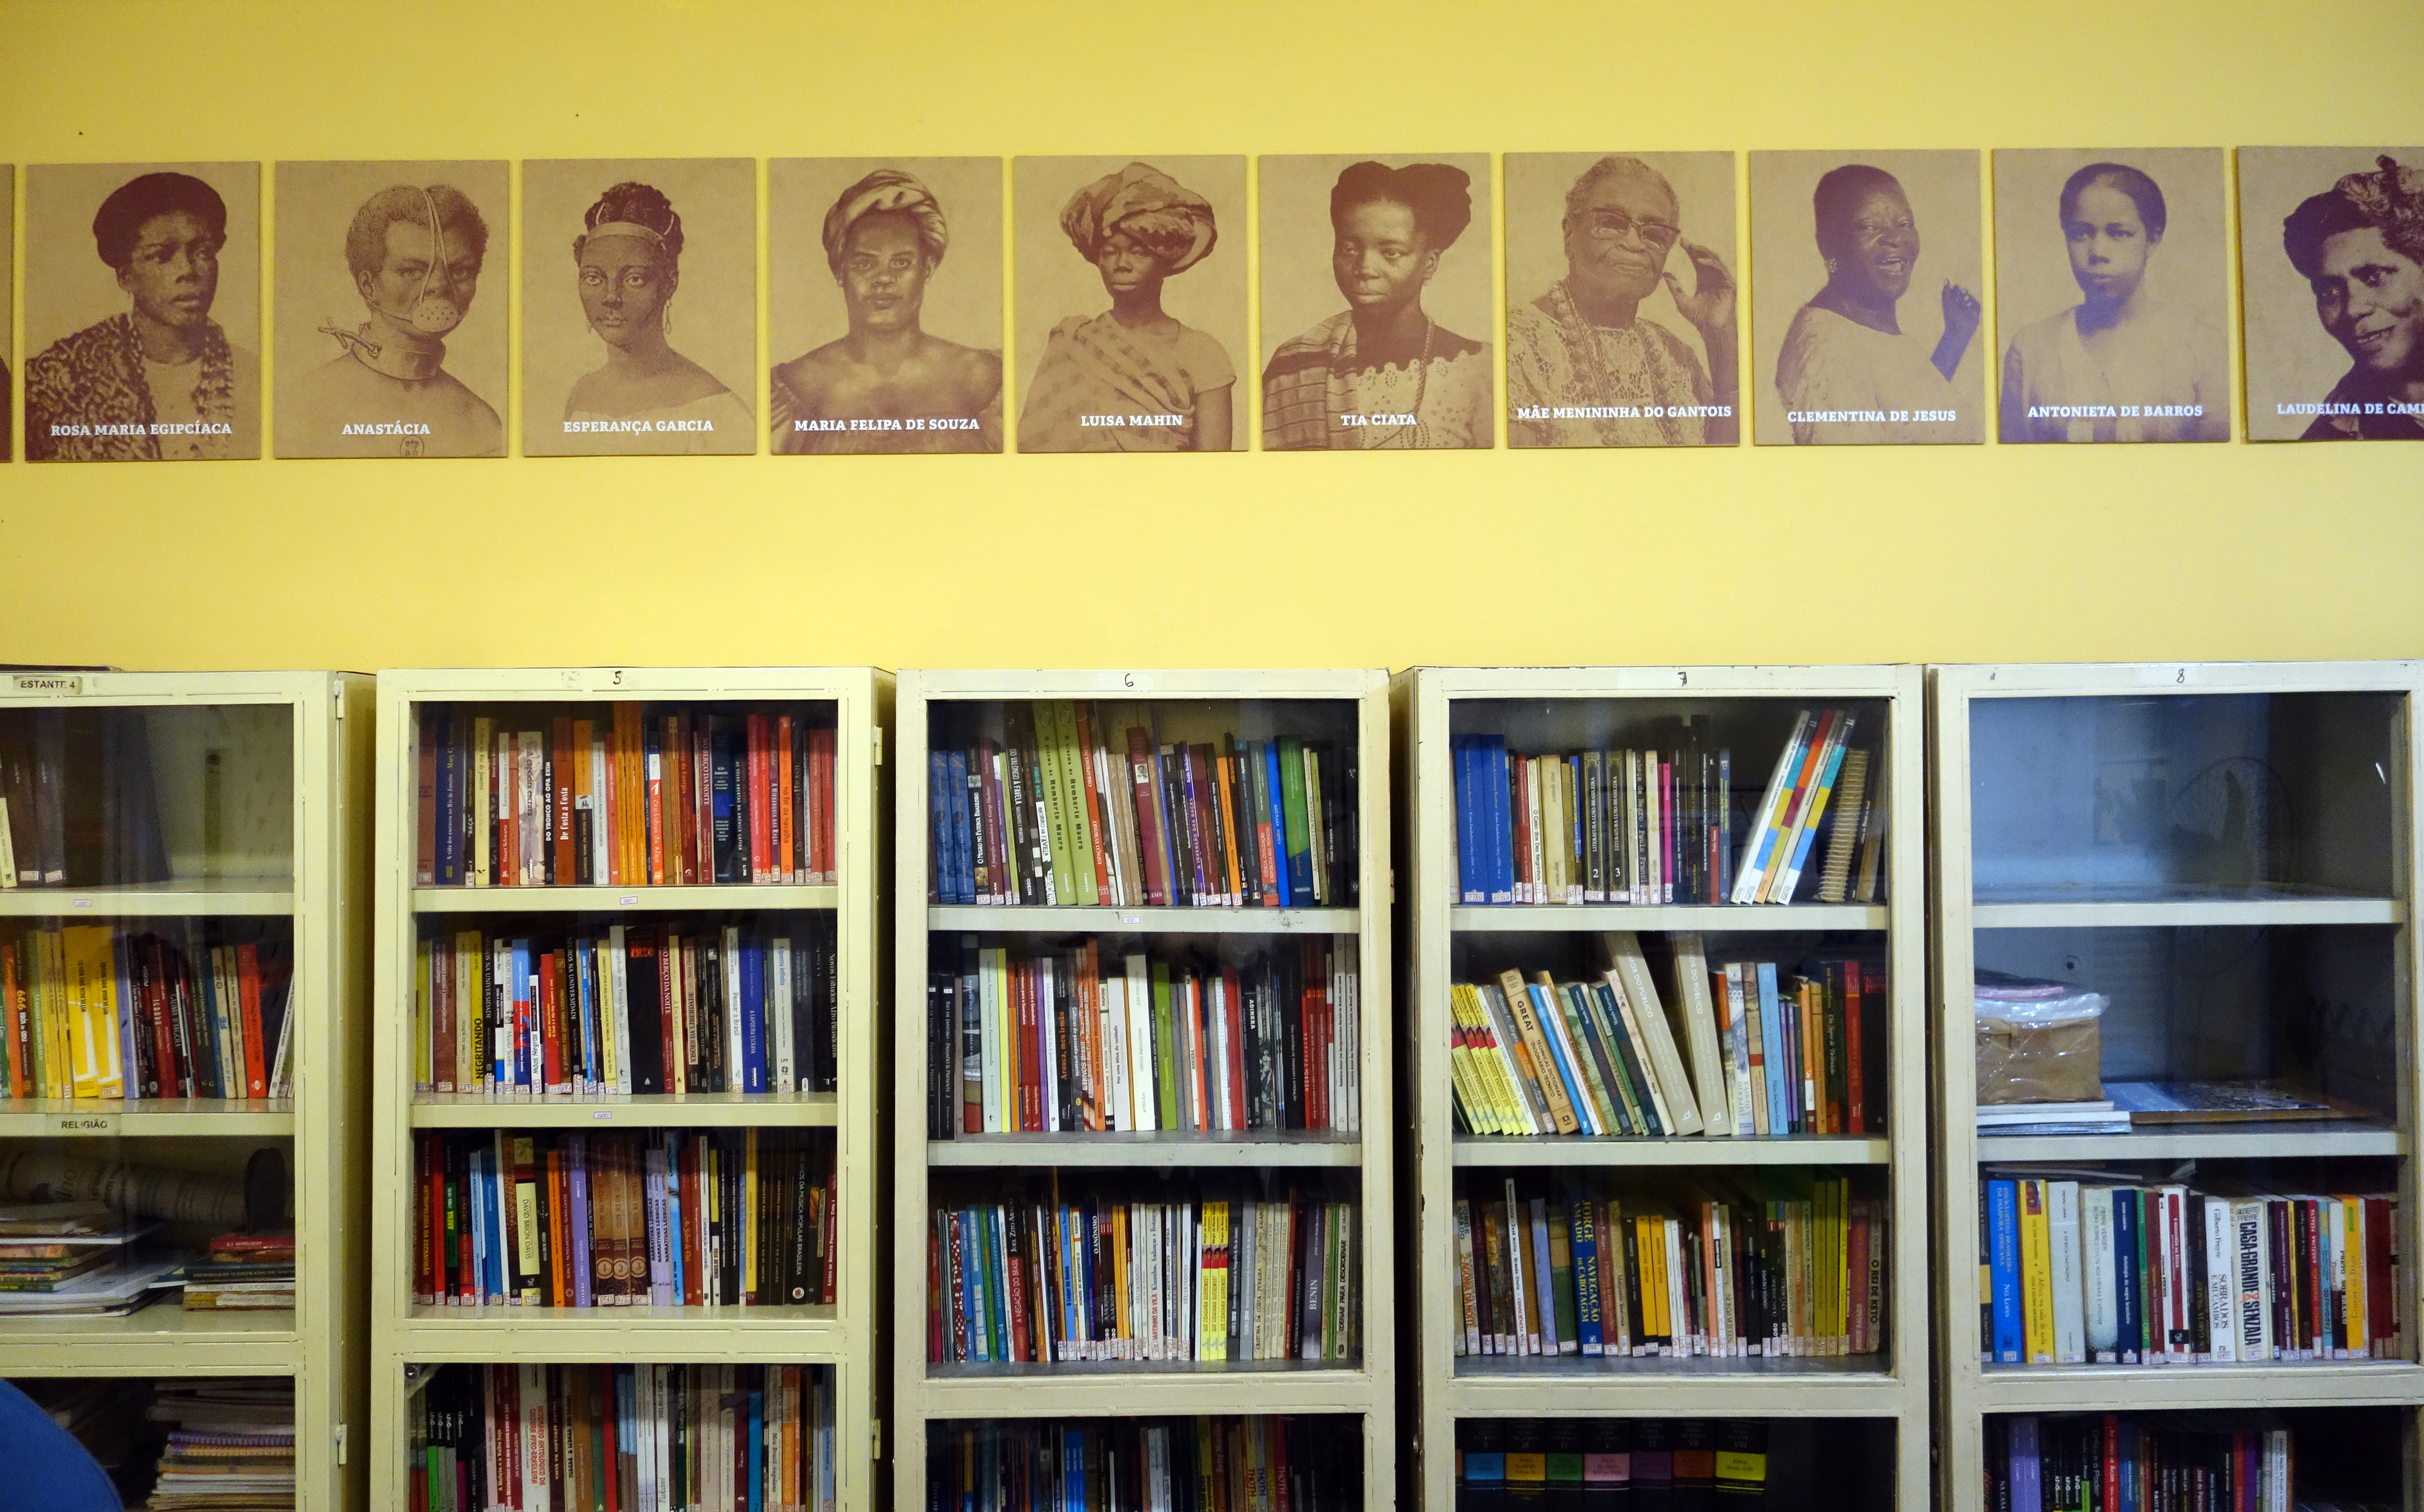 Black Heroine Mural, digital prints on MDF, 30x45cm, 2016. A series of 16 portraits of Black heroines in Brazilian history, from the 17th to the 20th century, permanently installed at the library of the Instituto de Pesquisa e Memória Pretos Novos.